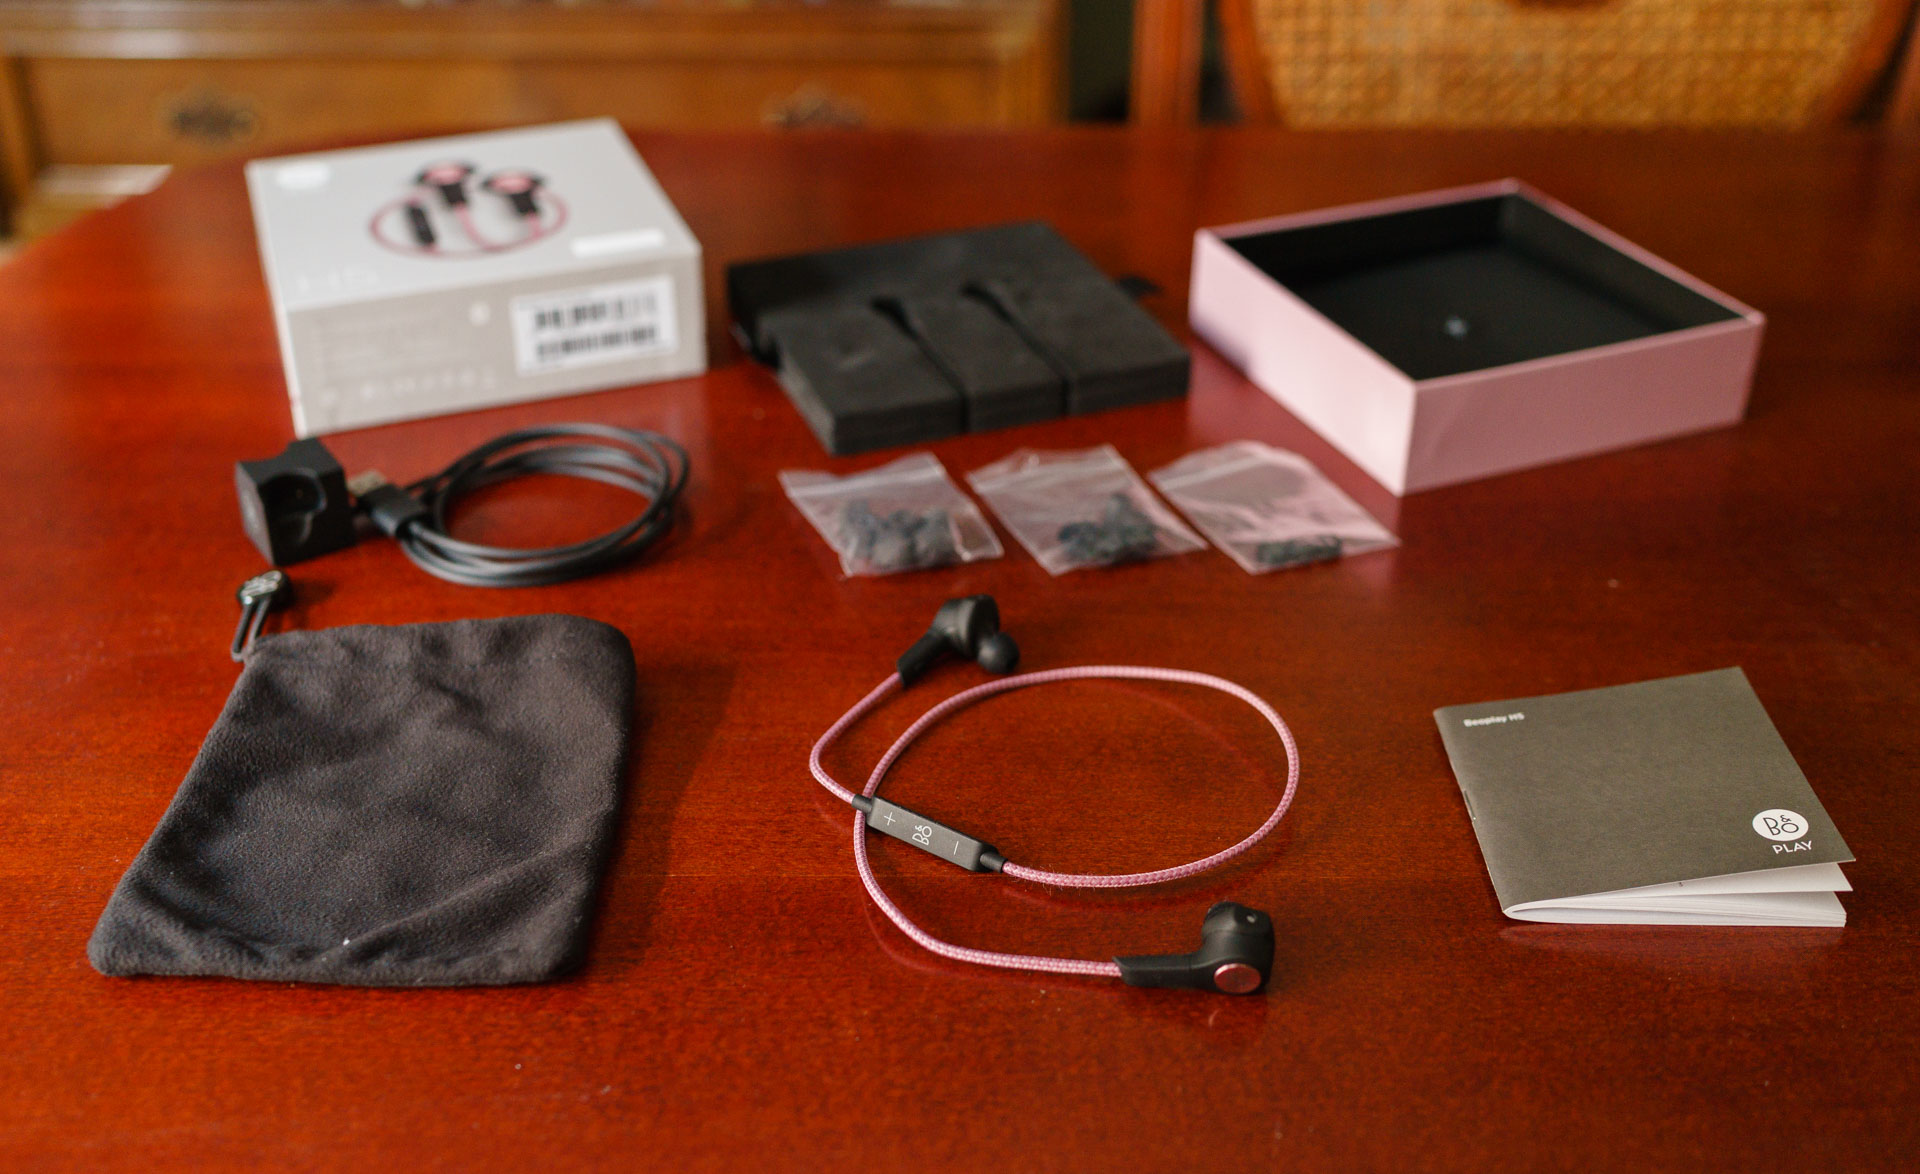 A Review of the B&O PLAY Beoplay H5 Wireless Earphones — Tools and Toys